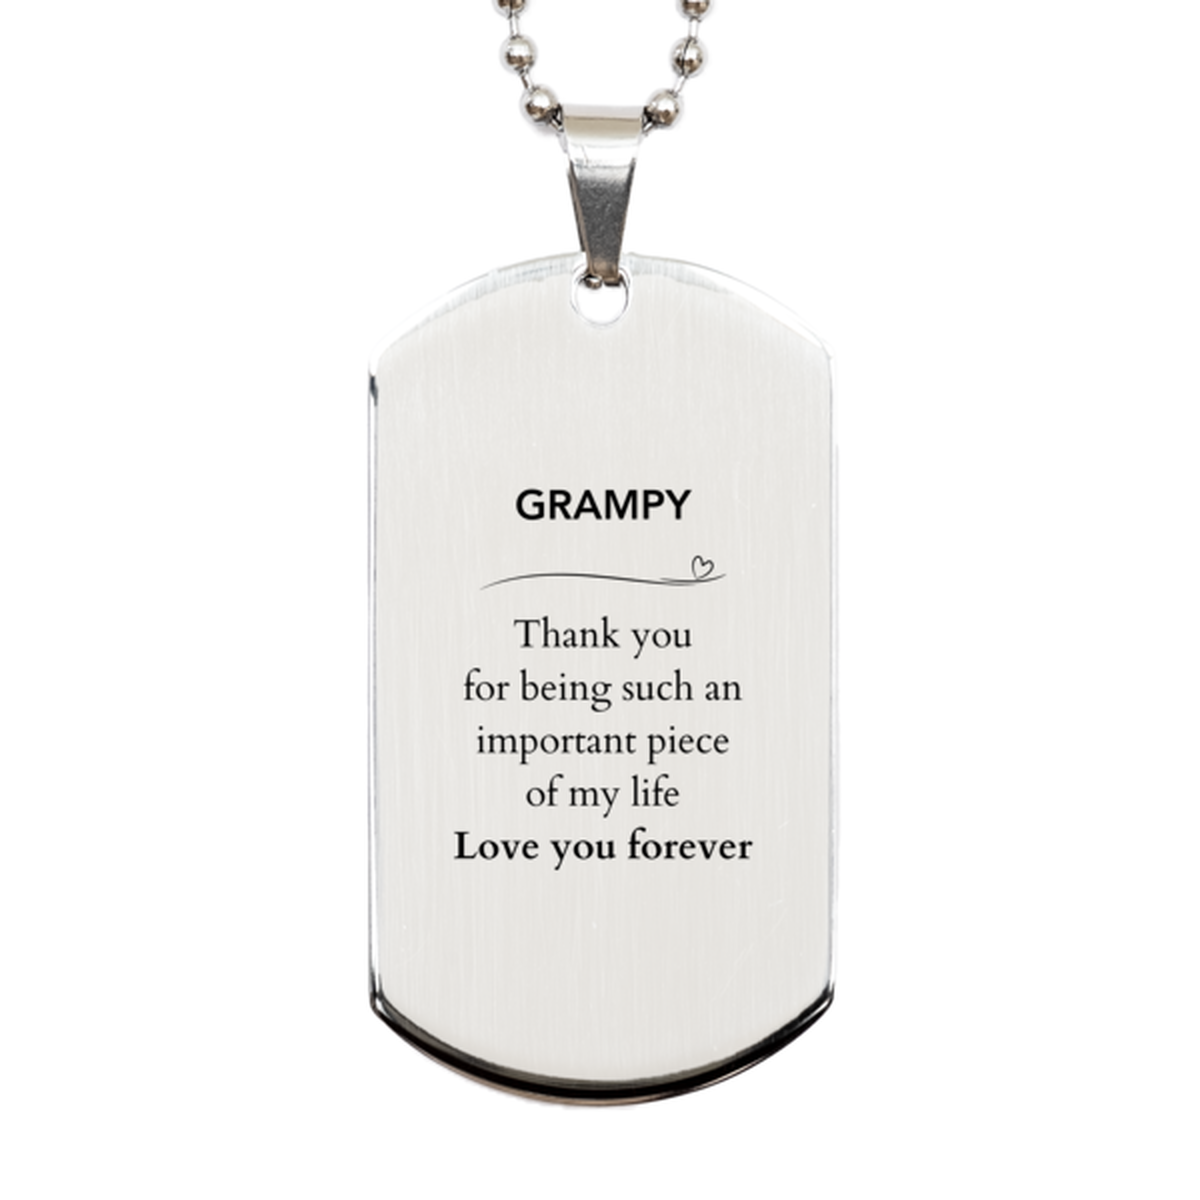 Appropriate Grampy Silver Dog Tag Epic Birthday Gifts for Grampy Thank you for being such an important piece of my life Grampy Christmas Mothers Fathers Day